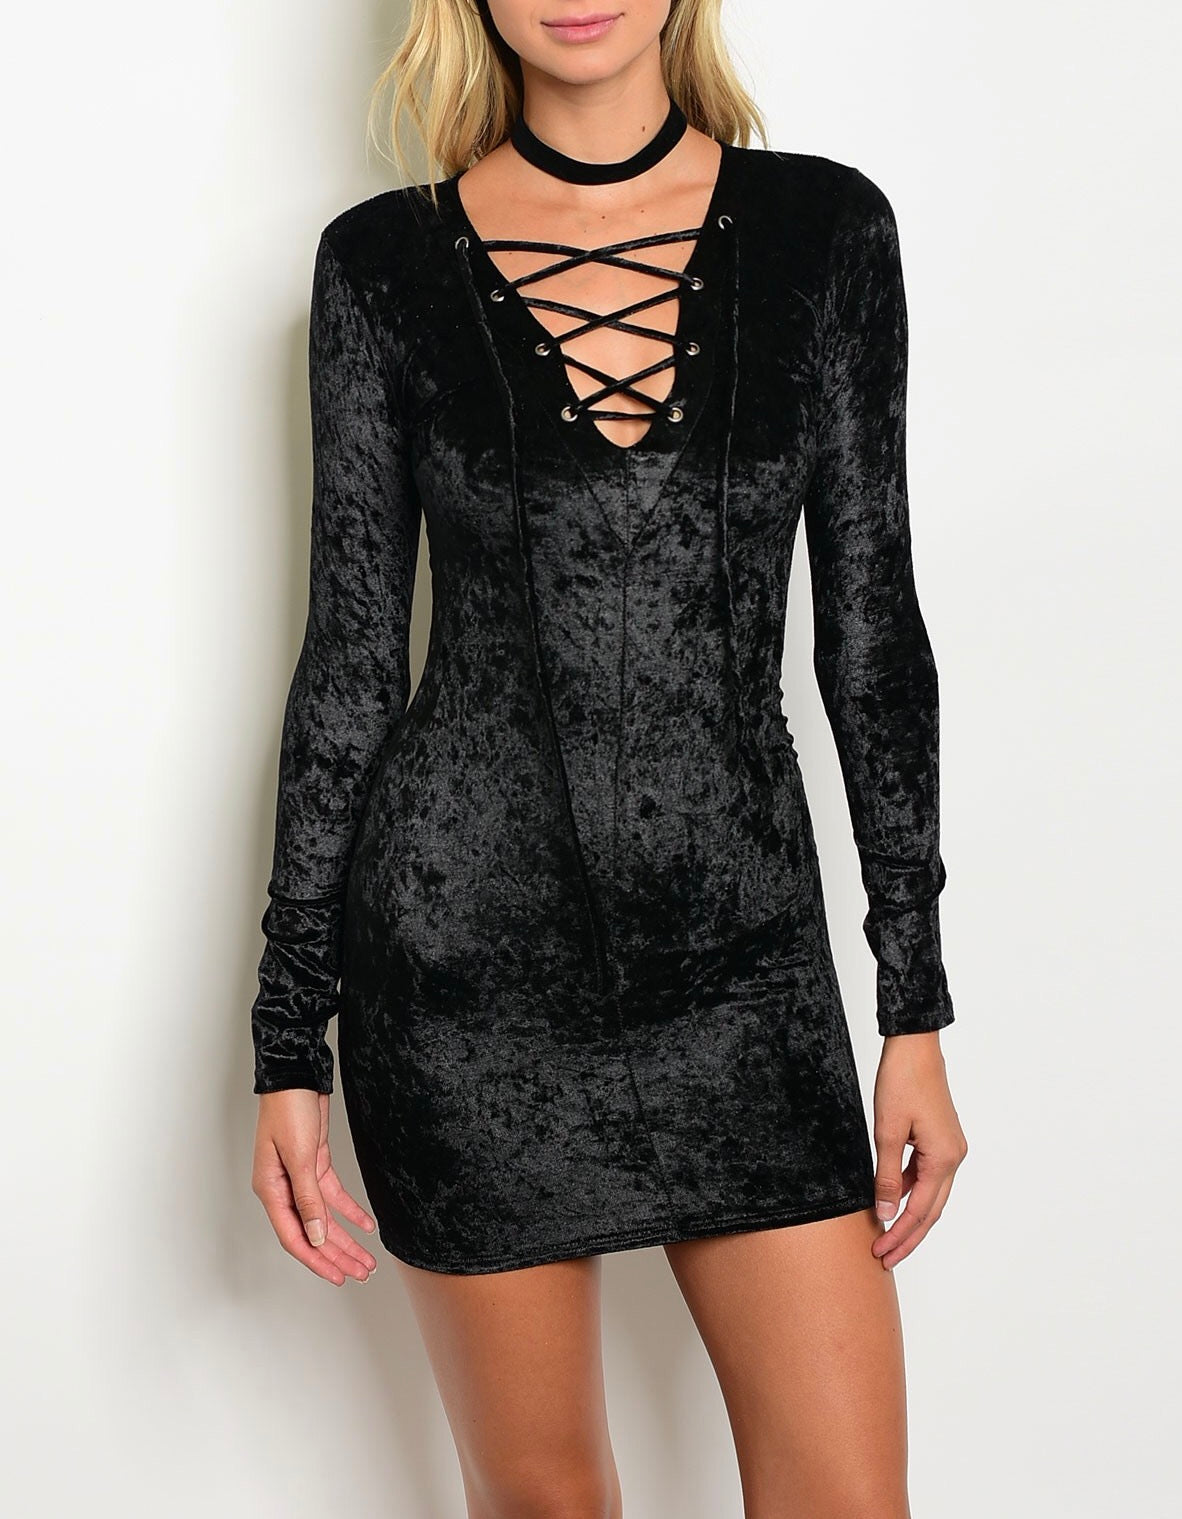 Black Velvet Mini Dress Lace Up Long Sleeve Crushed Bodycon Sexy Small